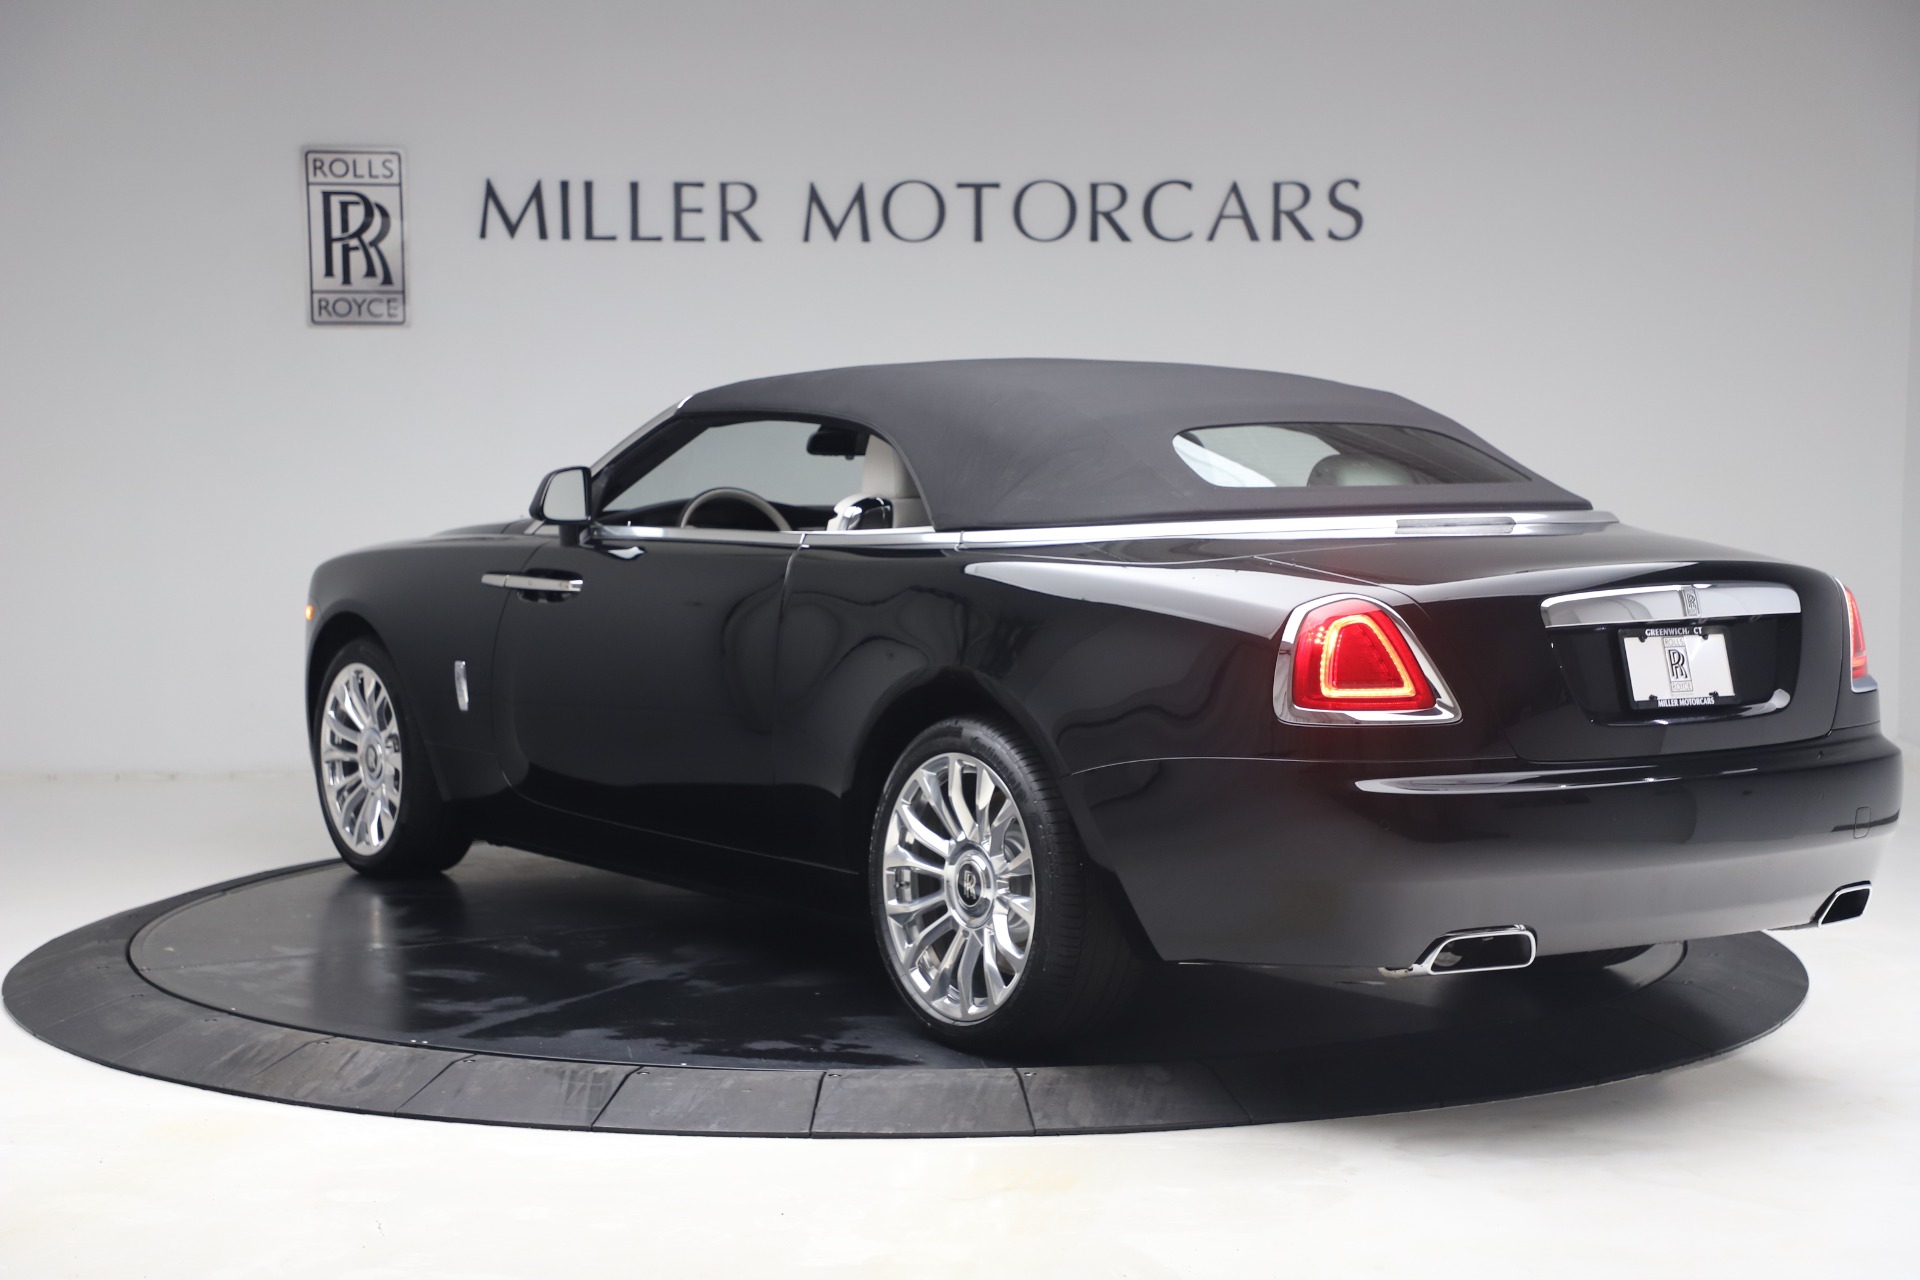 New 2021 Rolls Royce Dawn For Sale Special Pricing Rolls Royce Motor Cars Greenwich Stock R618 8223